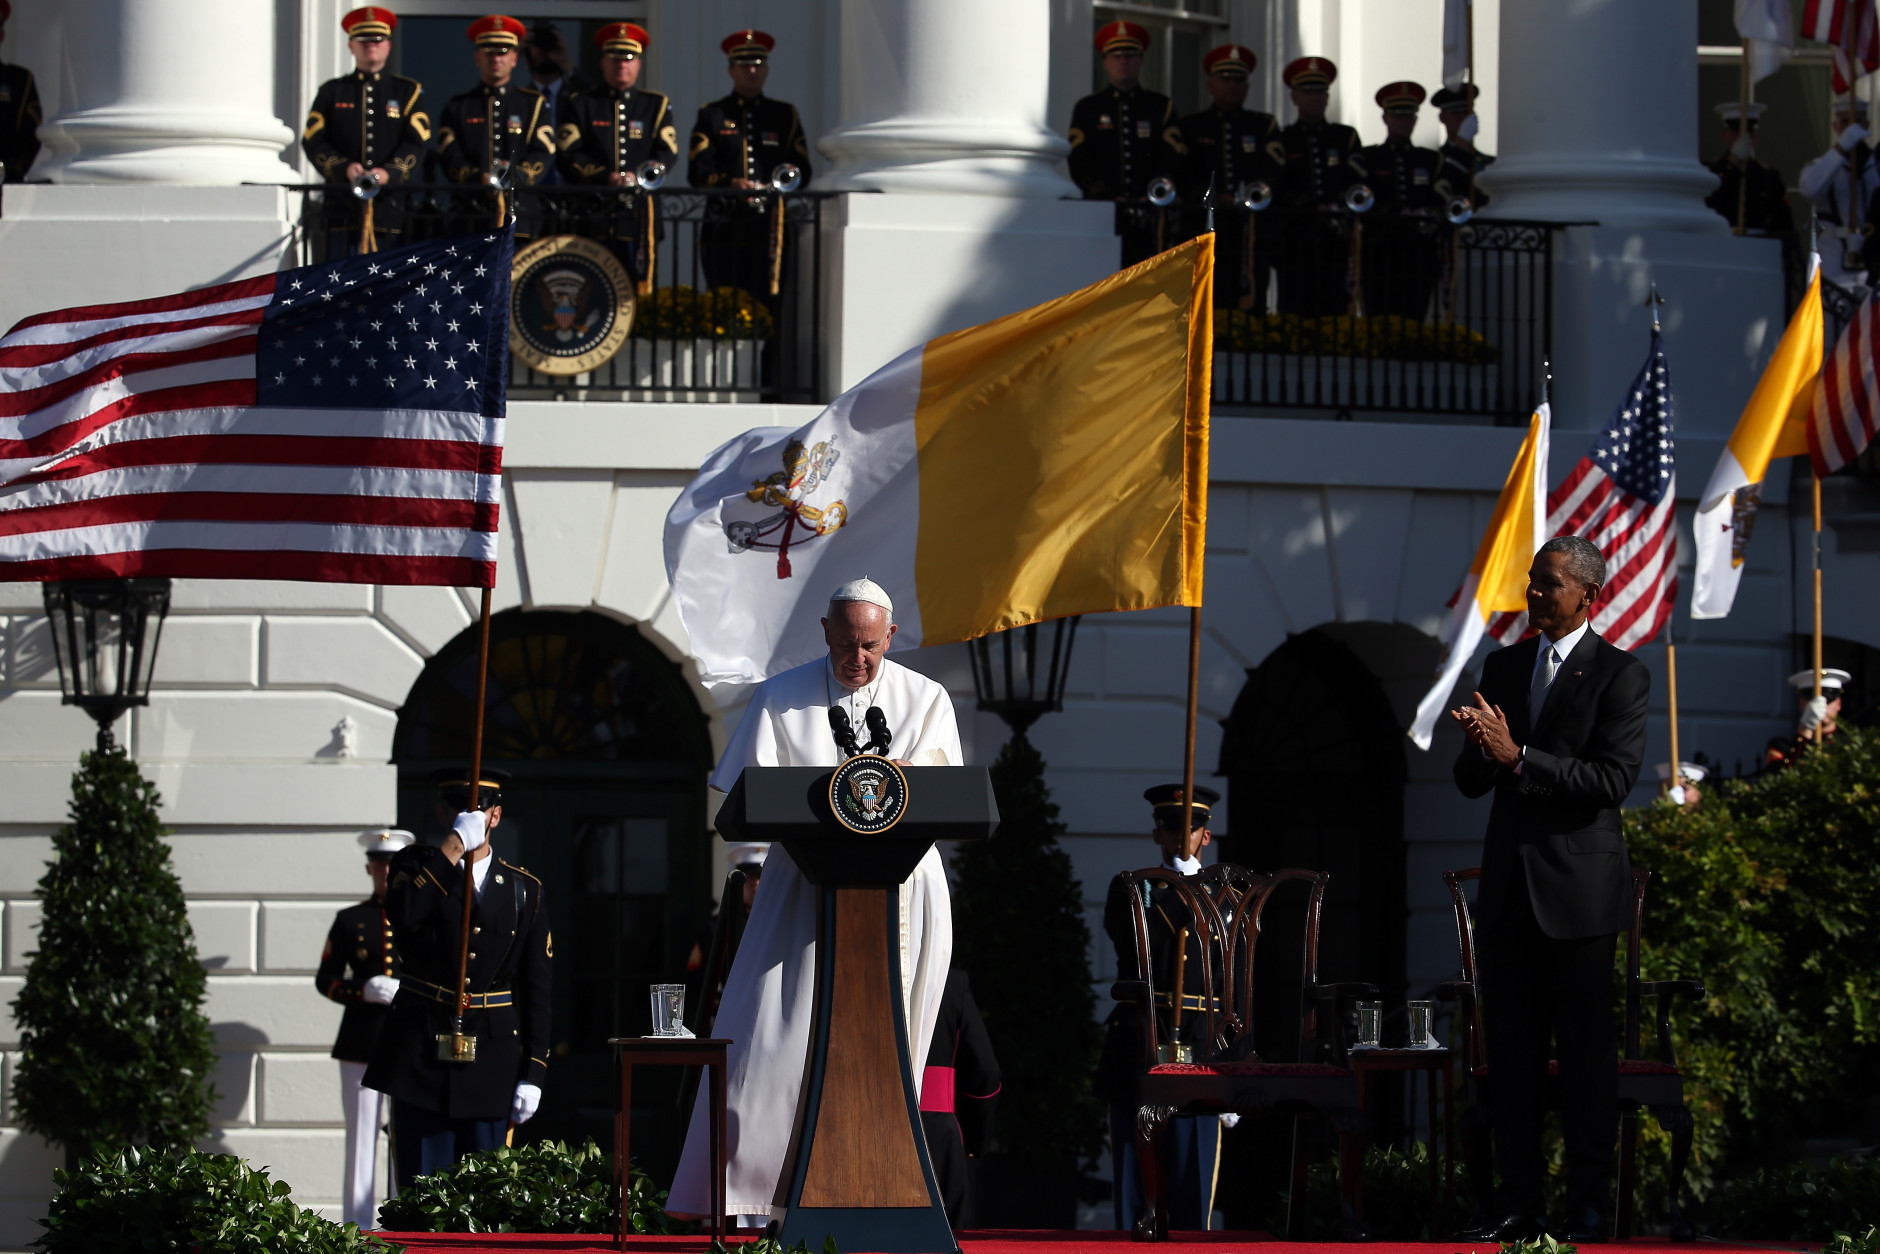 Pope Francis and U.S. President Barack Obama participate in an arrival ceremony at the White House on September 23, 2015 in Washington, DC. The Pope begins his first trip to the United States at the White House followed by a visit to St. Matthew's Cathedral, and will then hold a Mass on the grounds of the Basilica of the National Shrine of the Immaculate Conception. *** Local Caption *** Barack Obama; Pope Francis